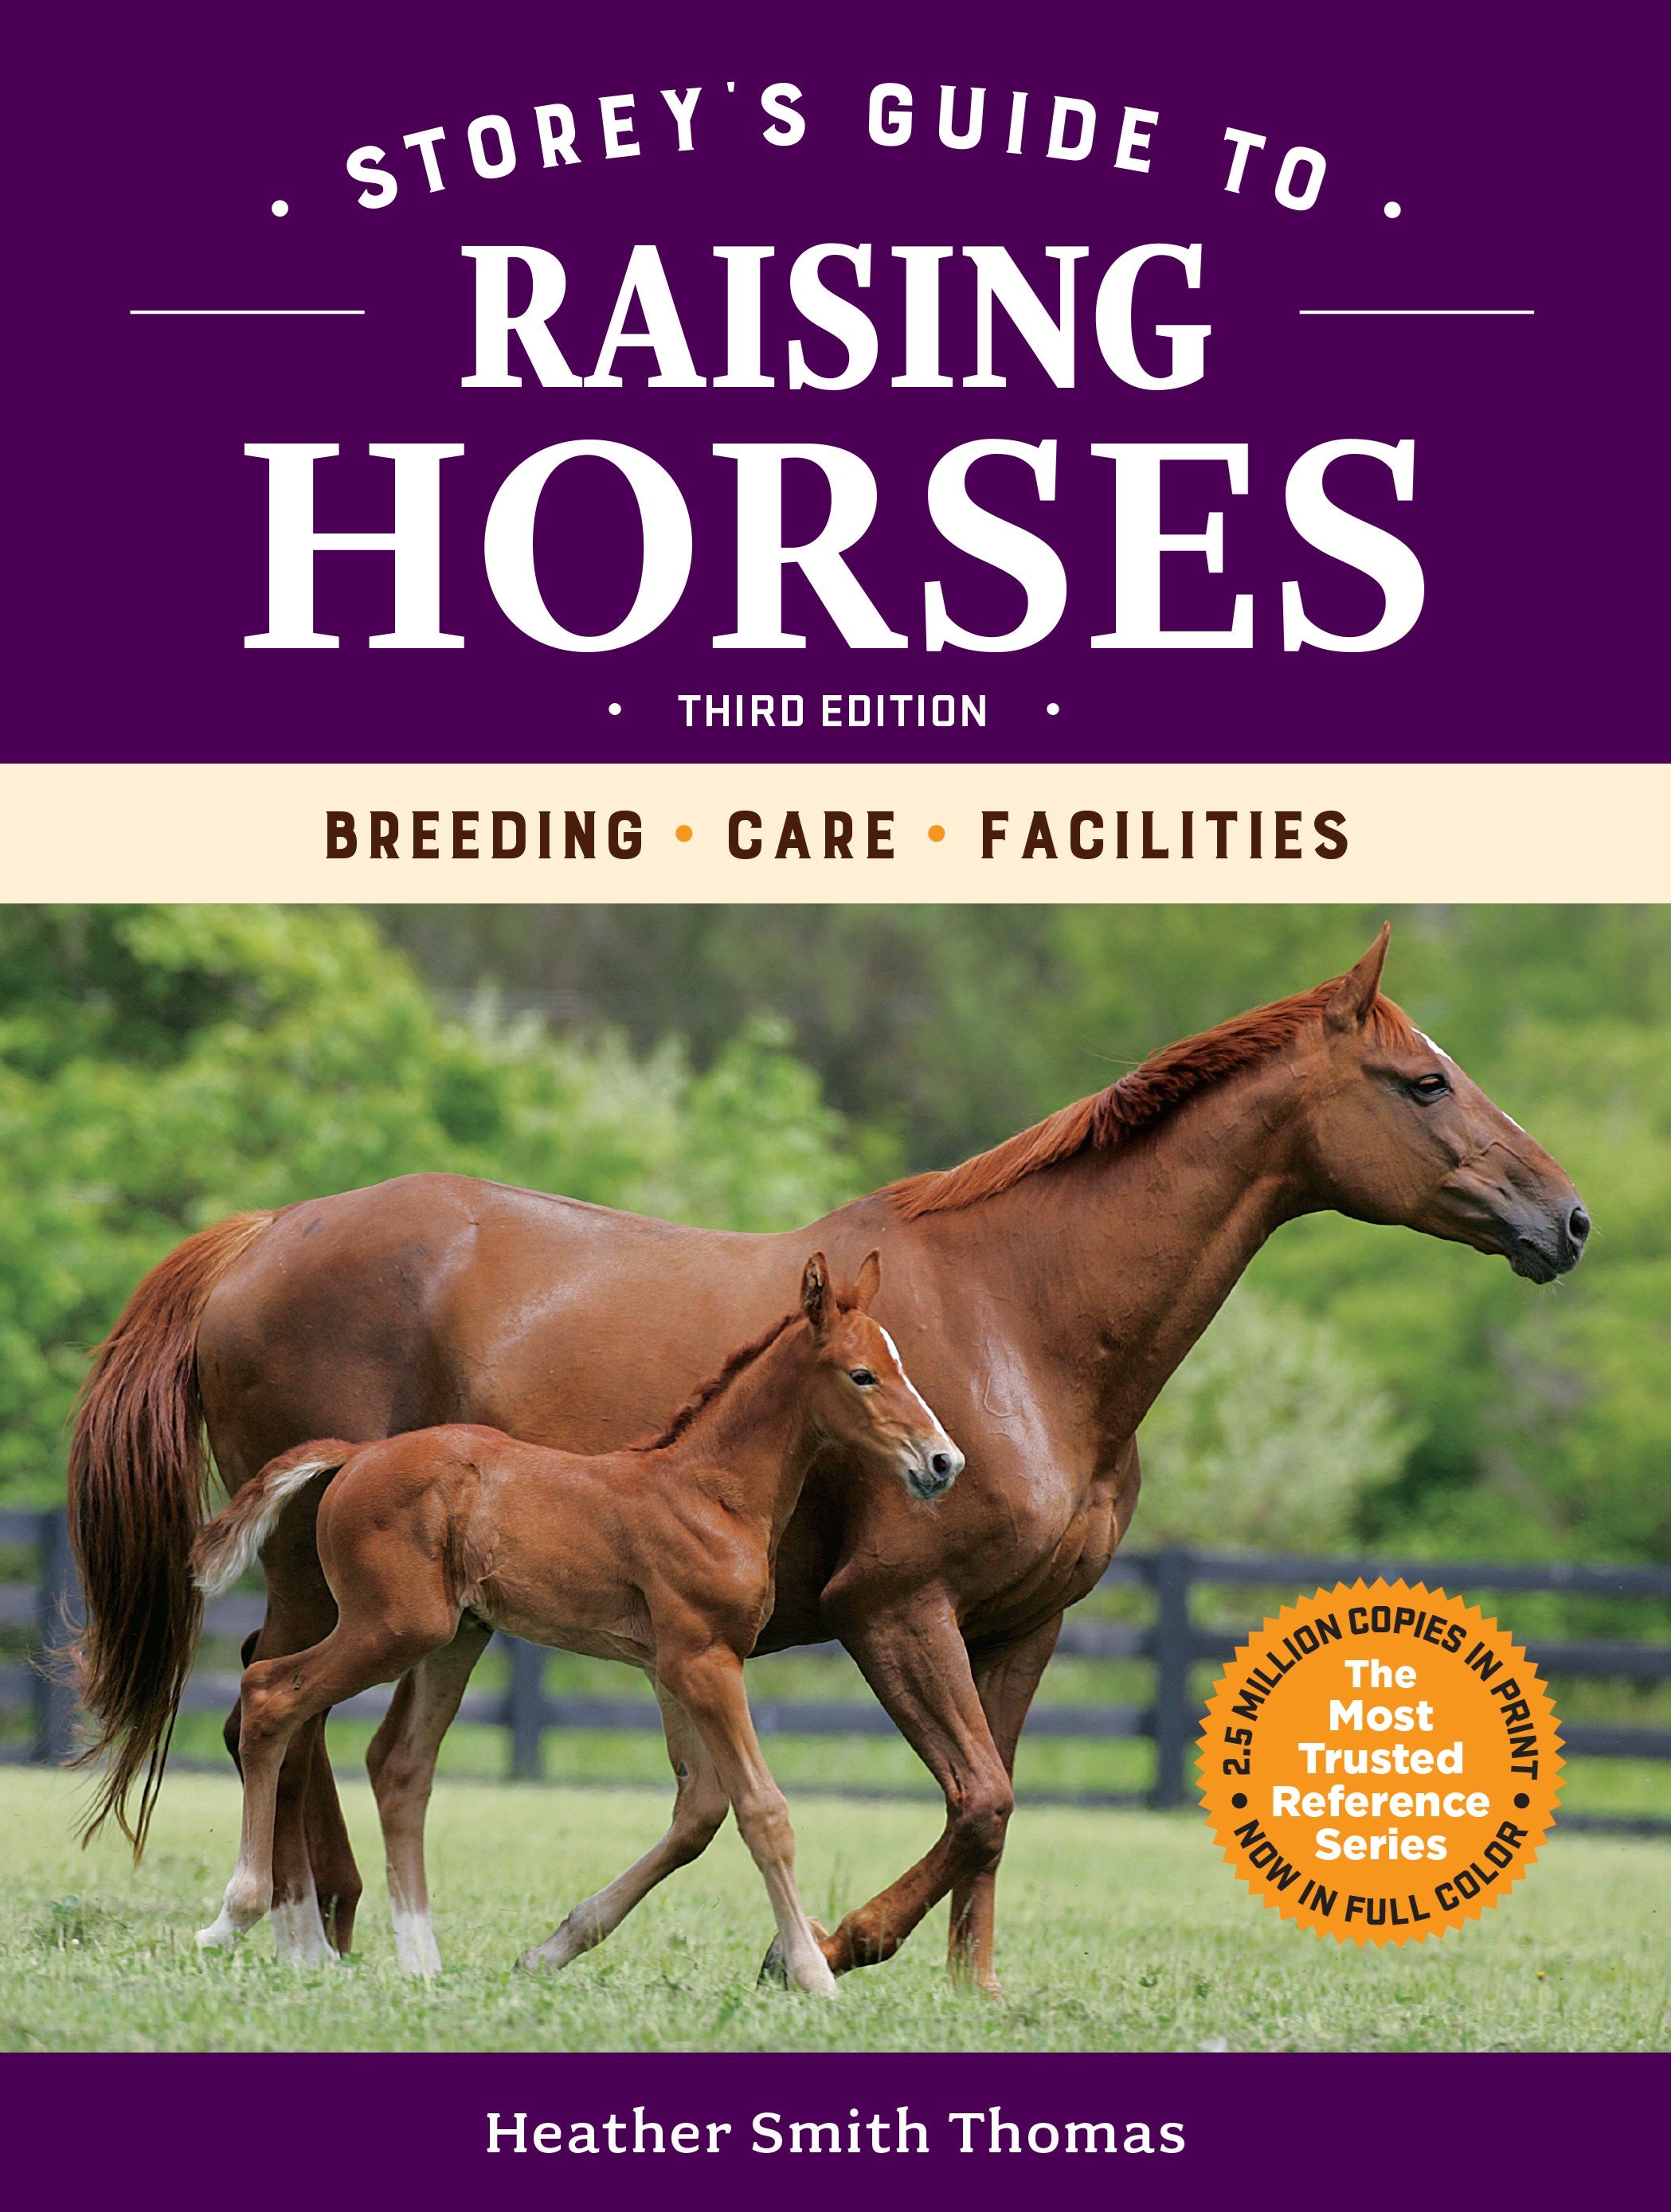 Storey's Guide to Raising Horses, 3rd Edition: Breeding, Care, Facilities (3rd Edition)